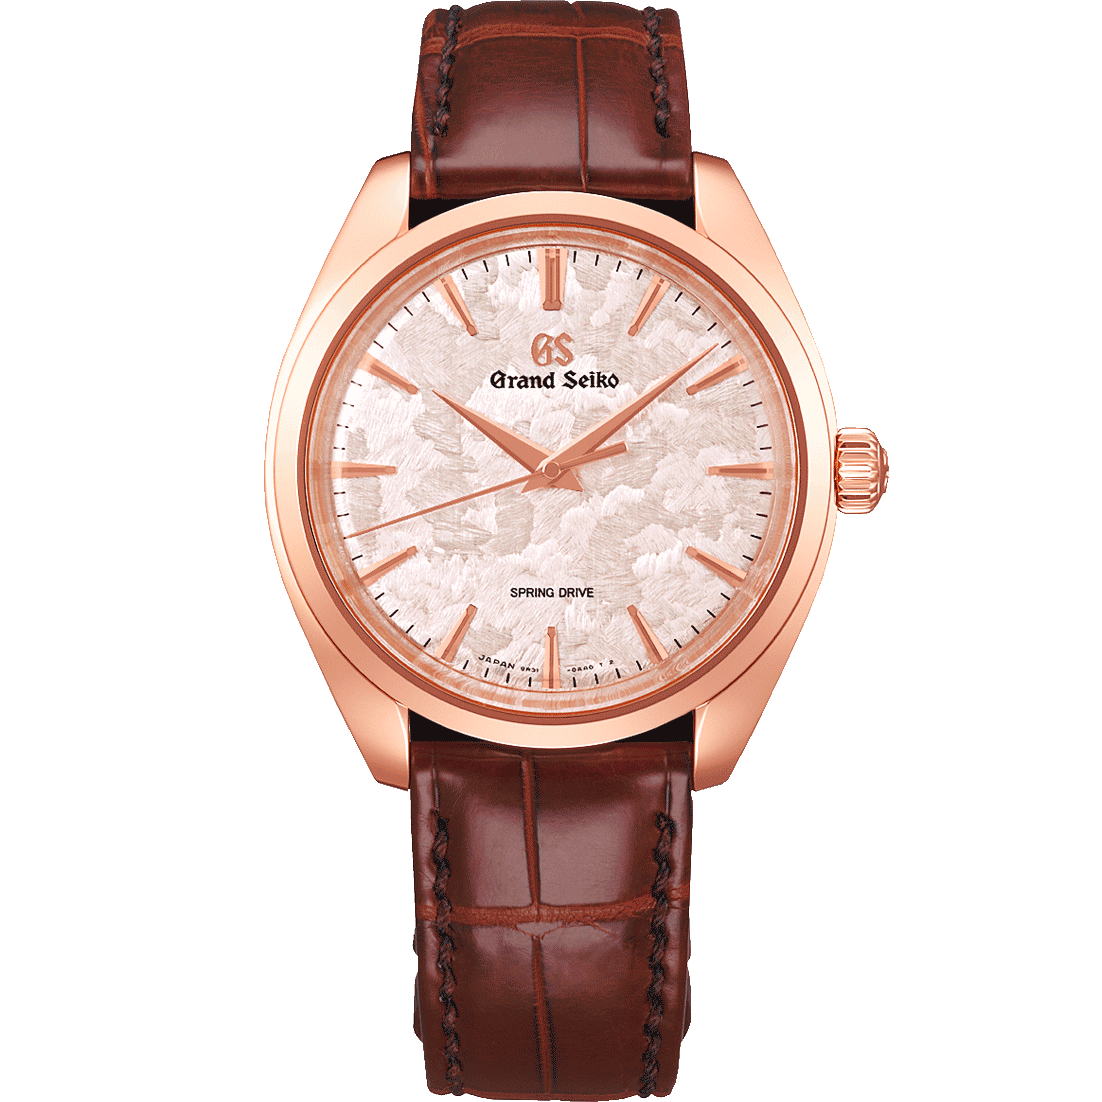 Grand Seiko SBGY026 gold Spring Drive pink dial watch